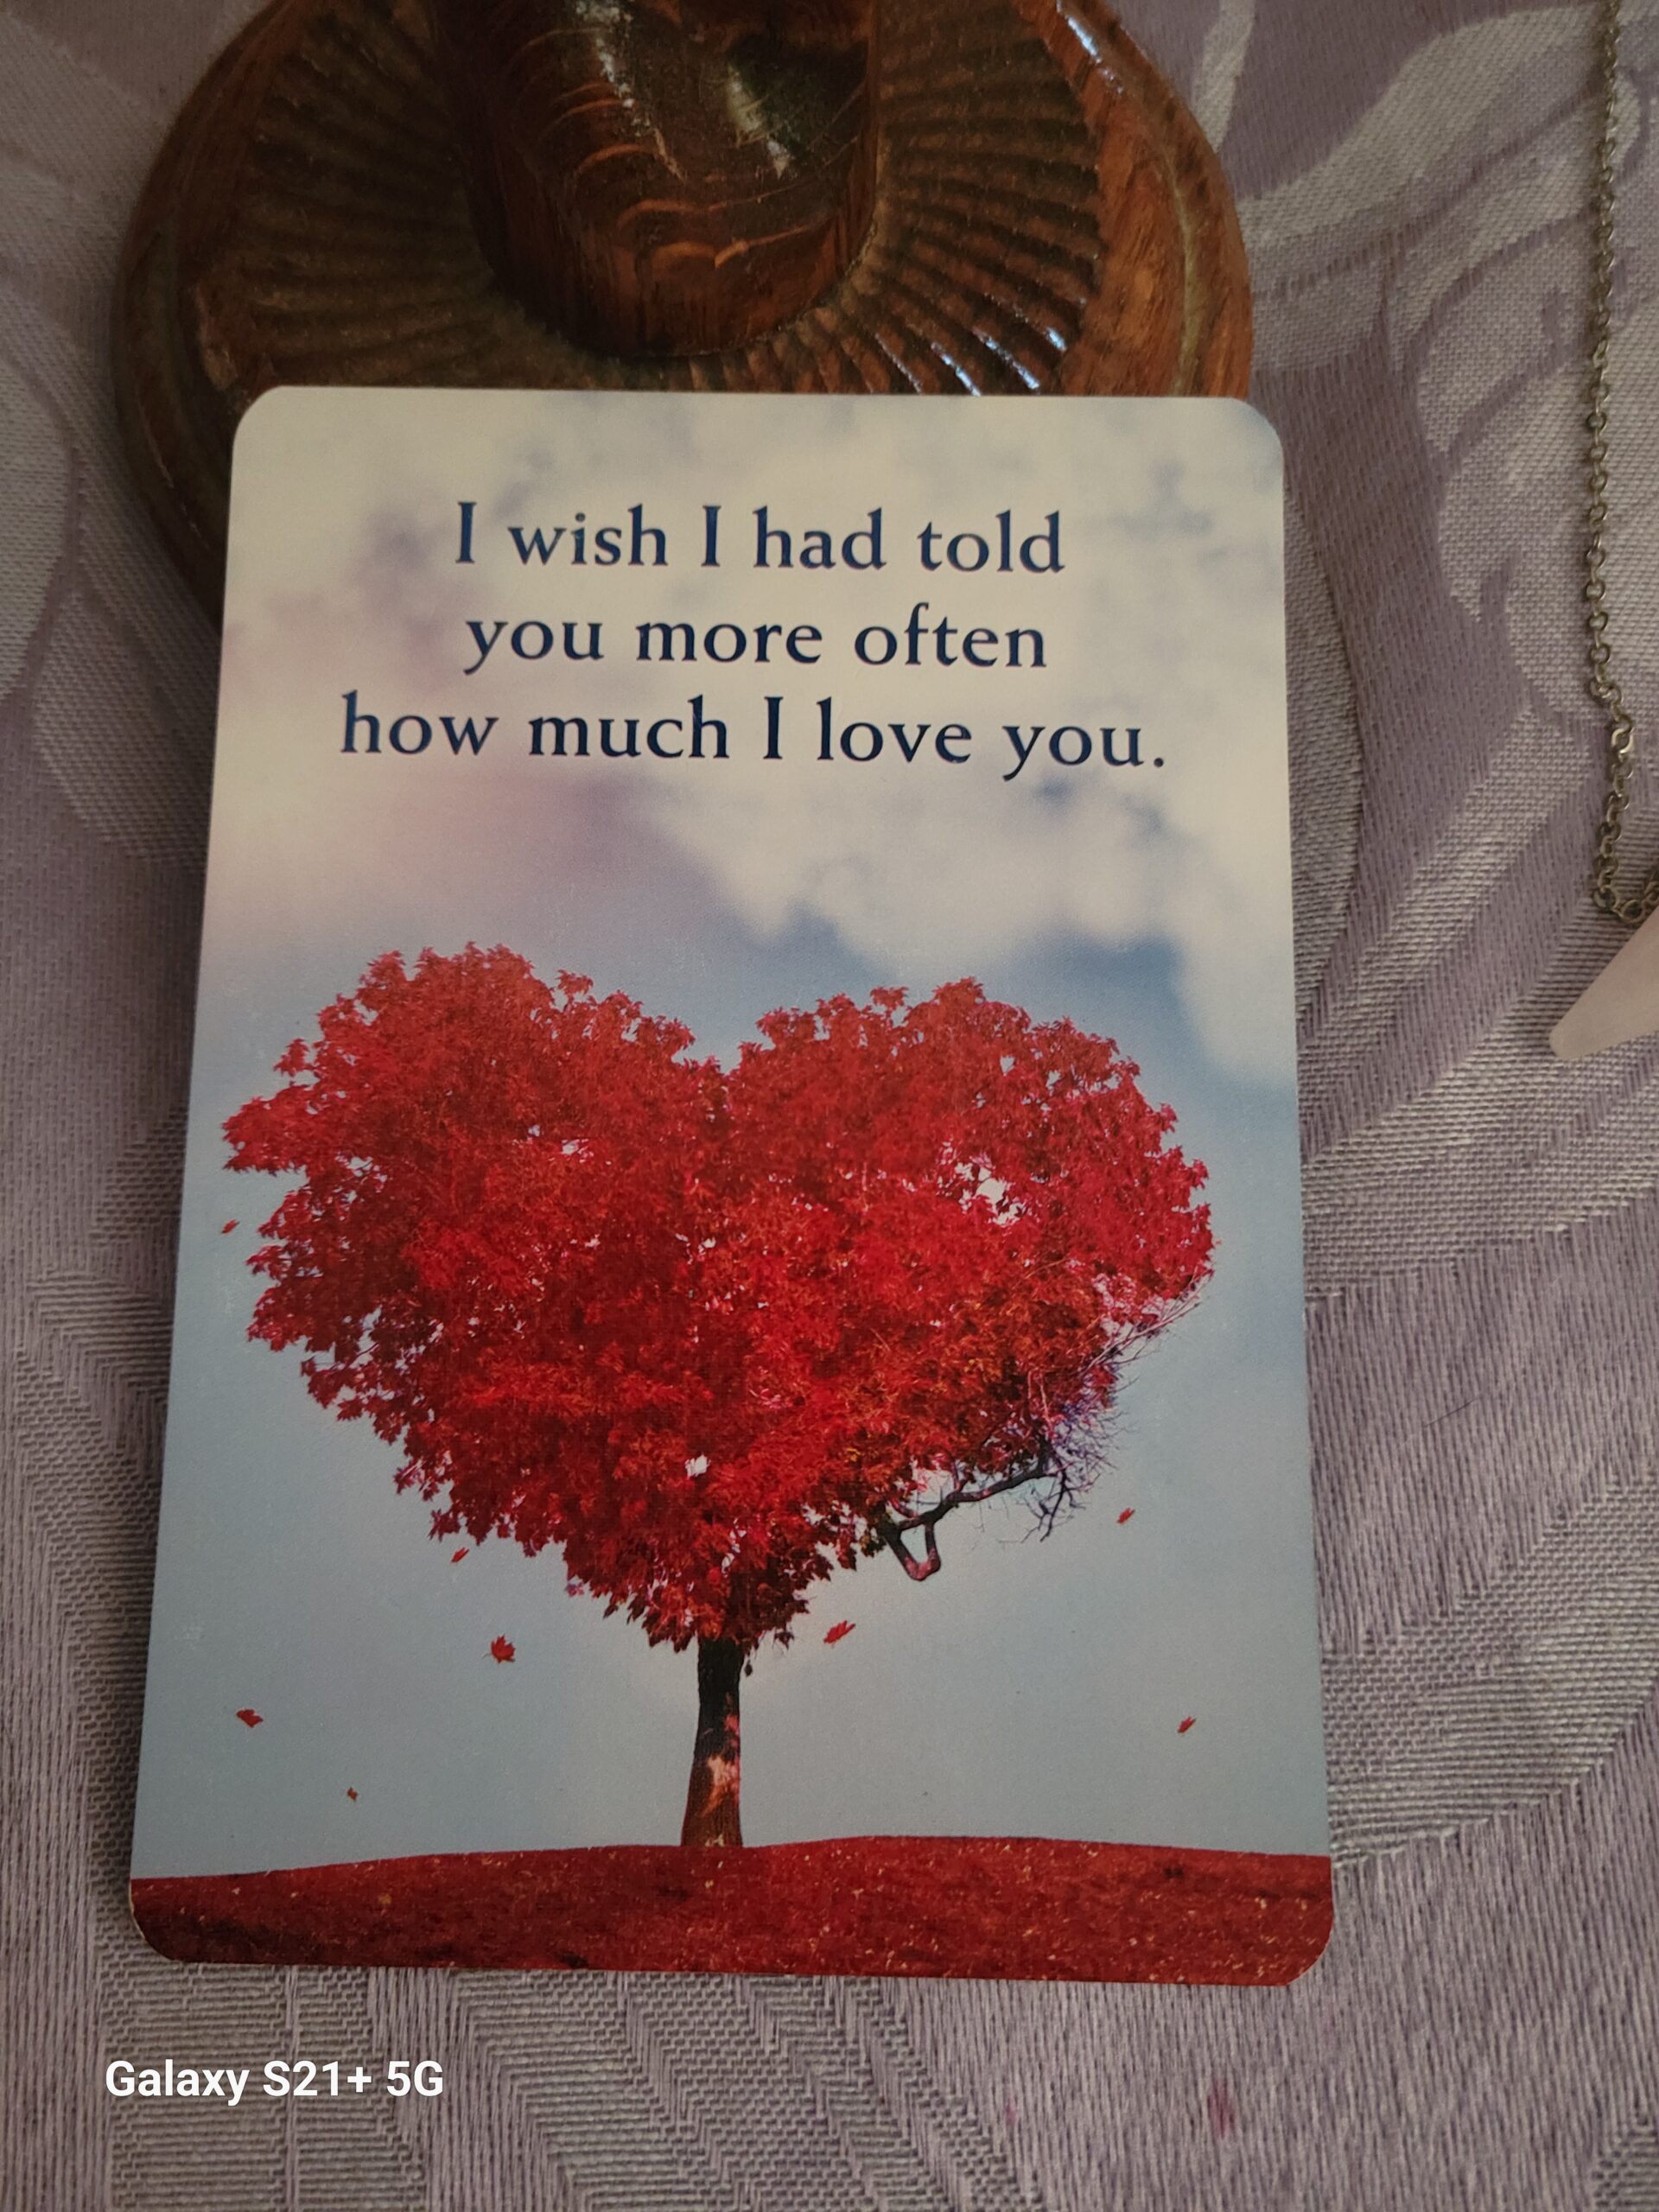 Daily Card Reading ~I wish I had told you more often how much I love you.